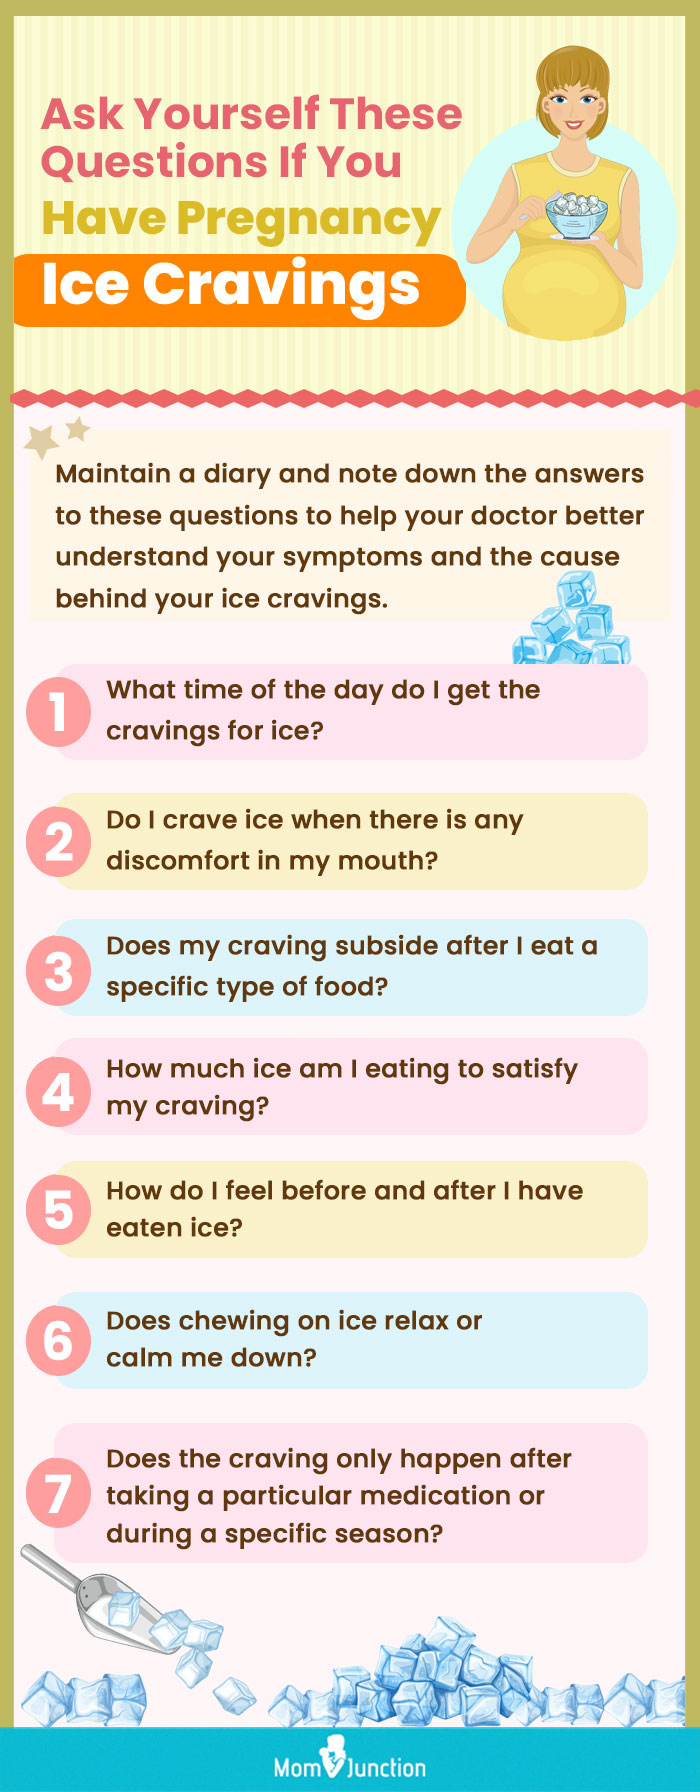 What Are the Benefits of Chewing Ice Cubes?